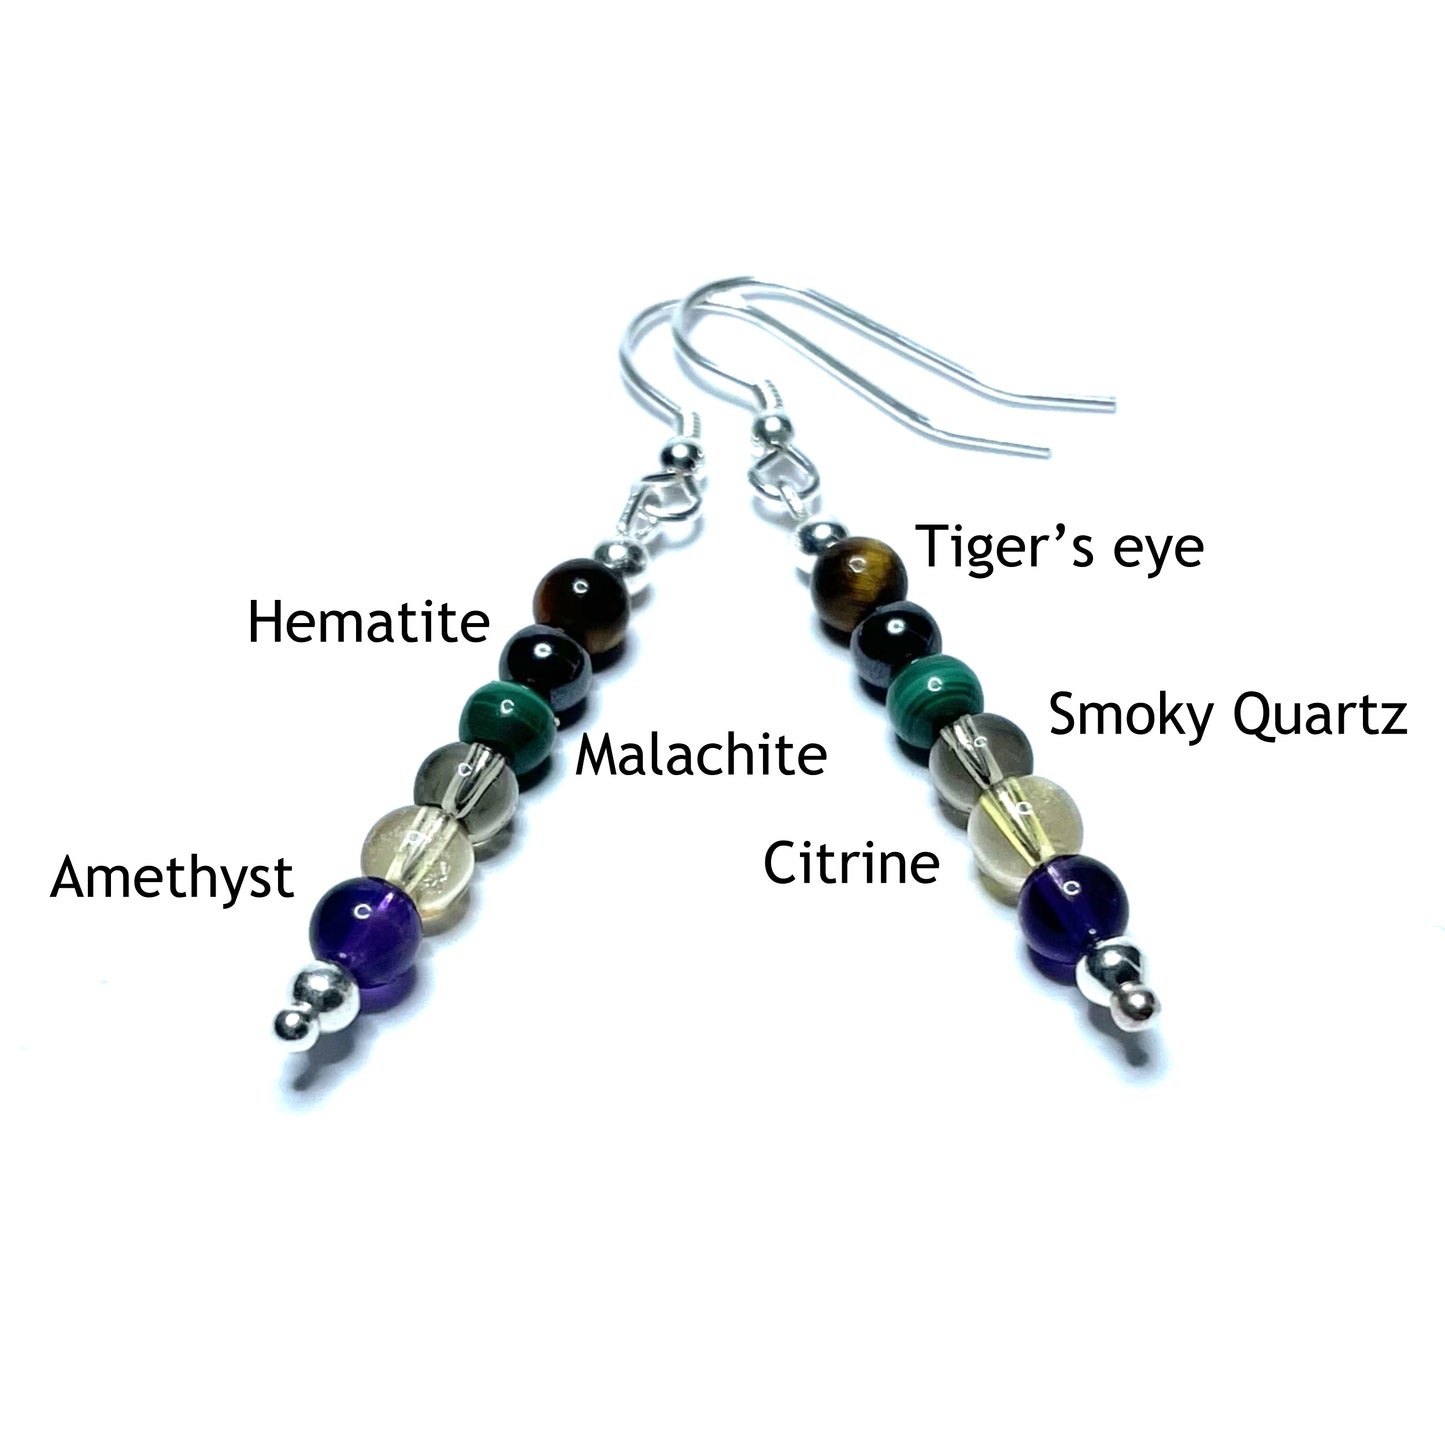 Addiction recovery earrings with the beads labelled as tiger's eye, hematite, malachite, smoky quartz, citrine and amethyst